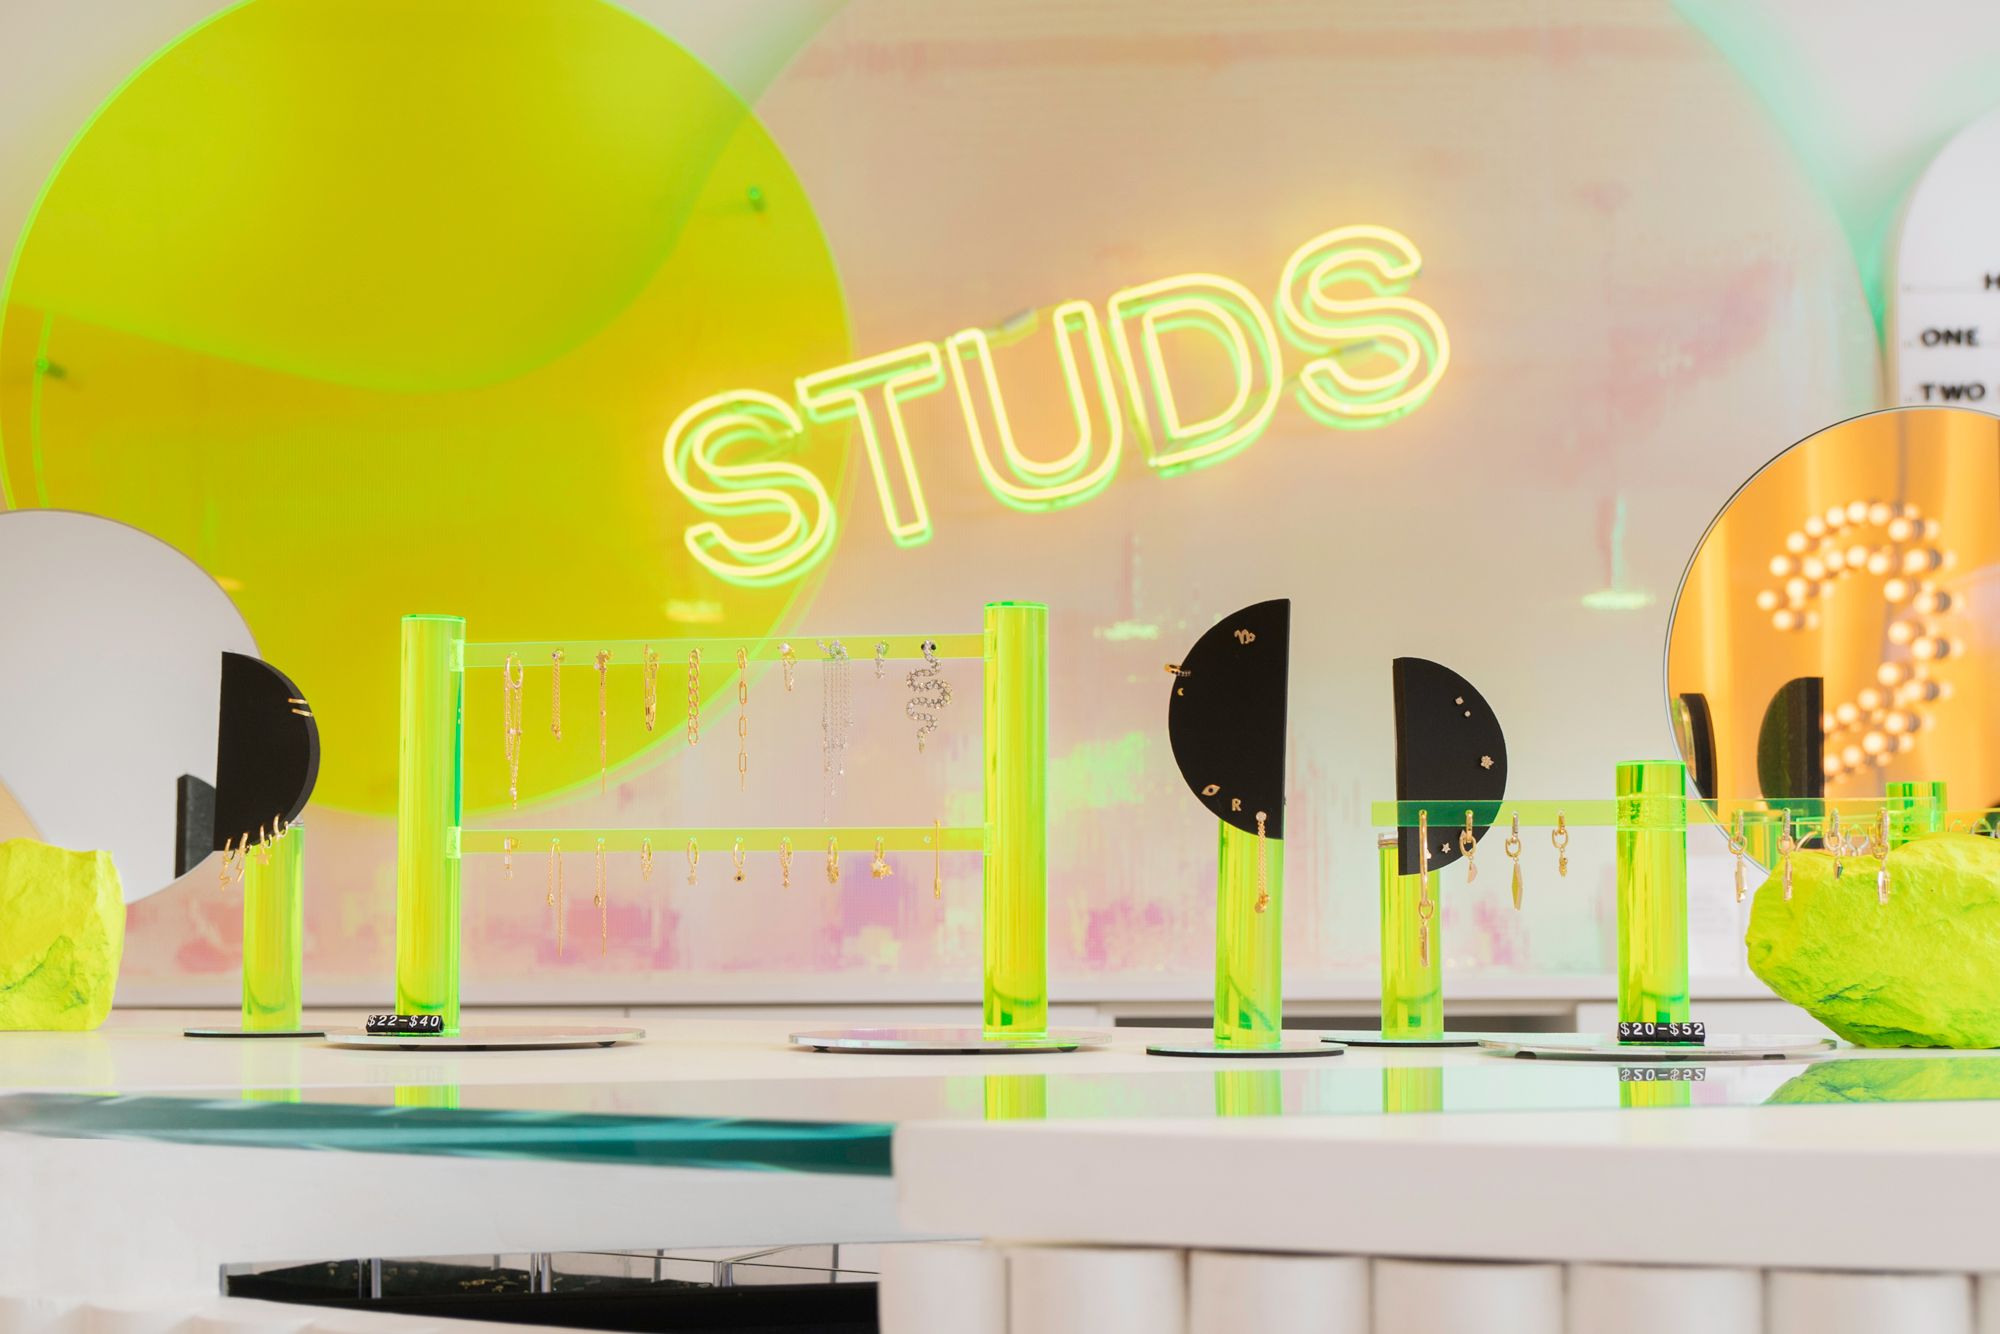 Chasing Giants: Studs says its ear-piercing studios can grow as